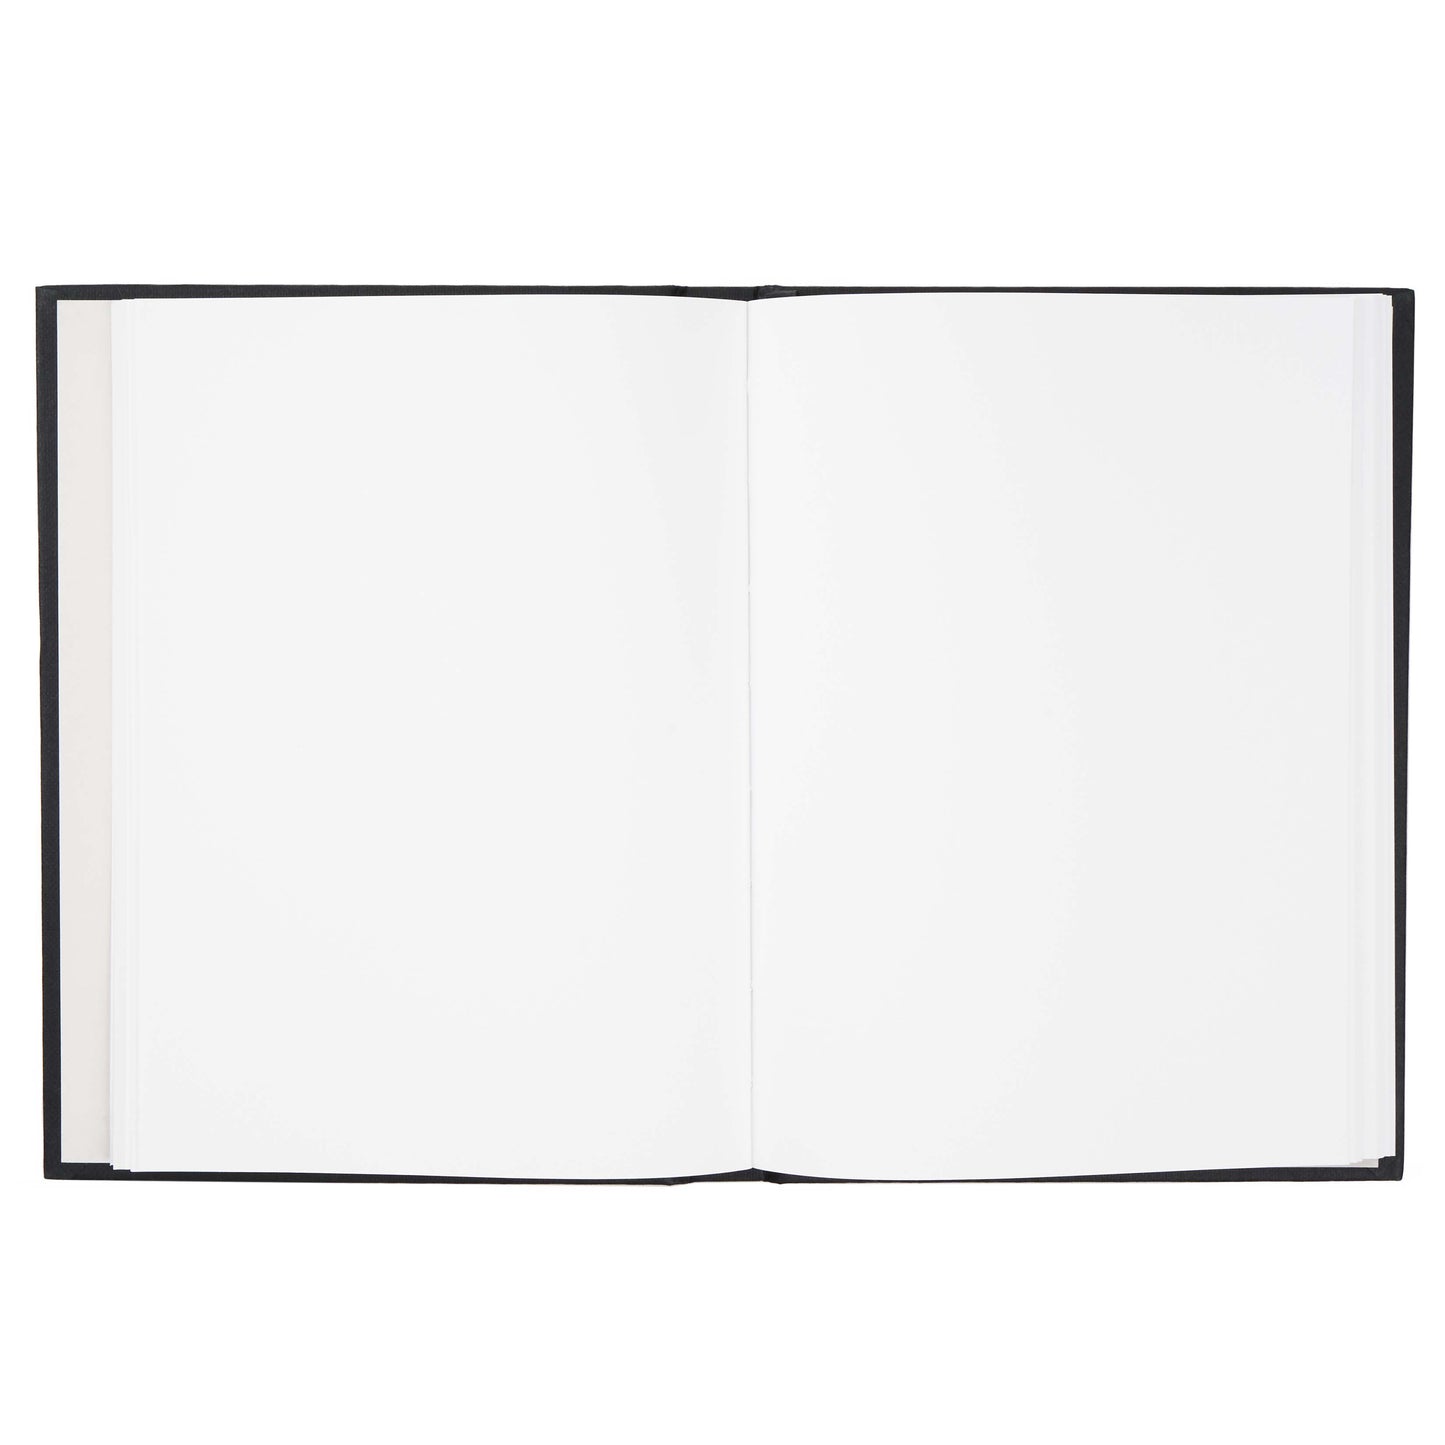 black blank plain page blocker paper notebook open and laying flat against a white background